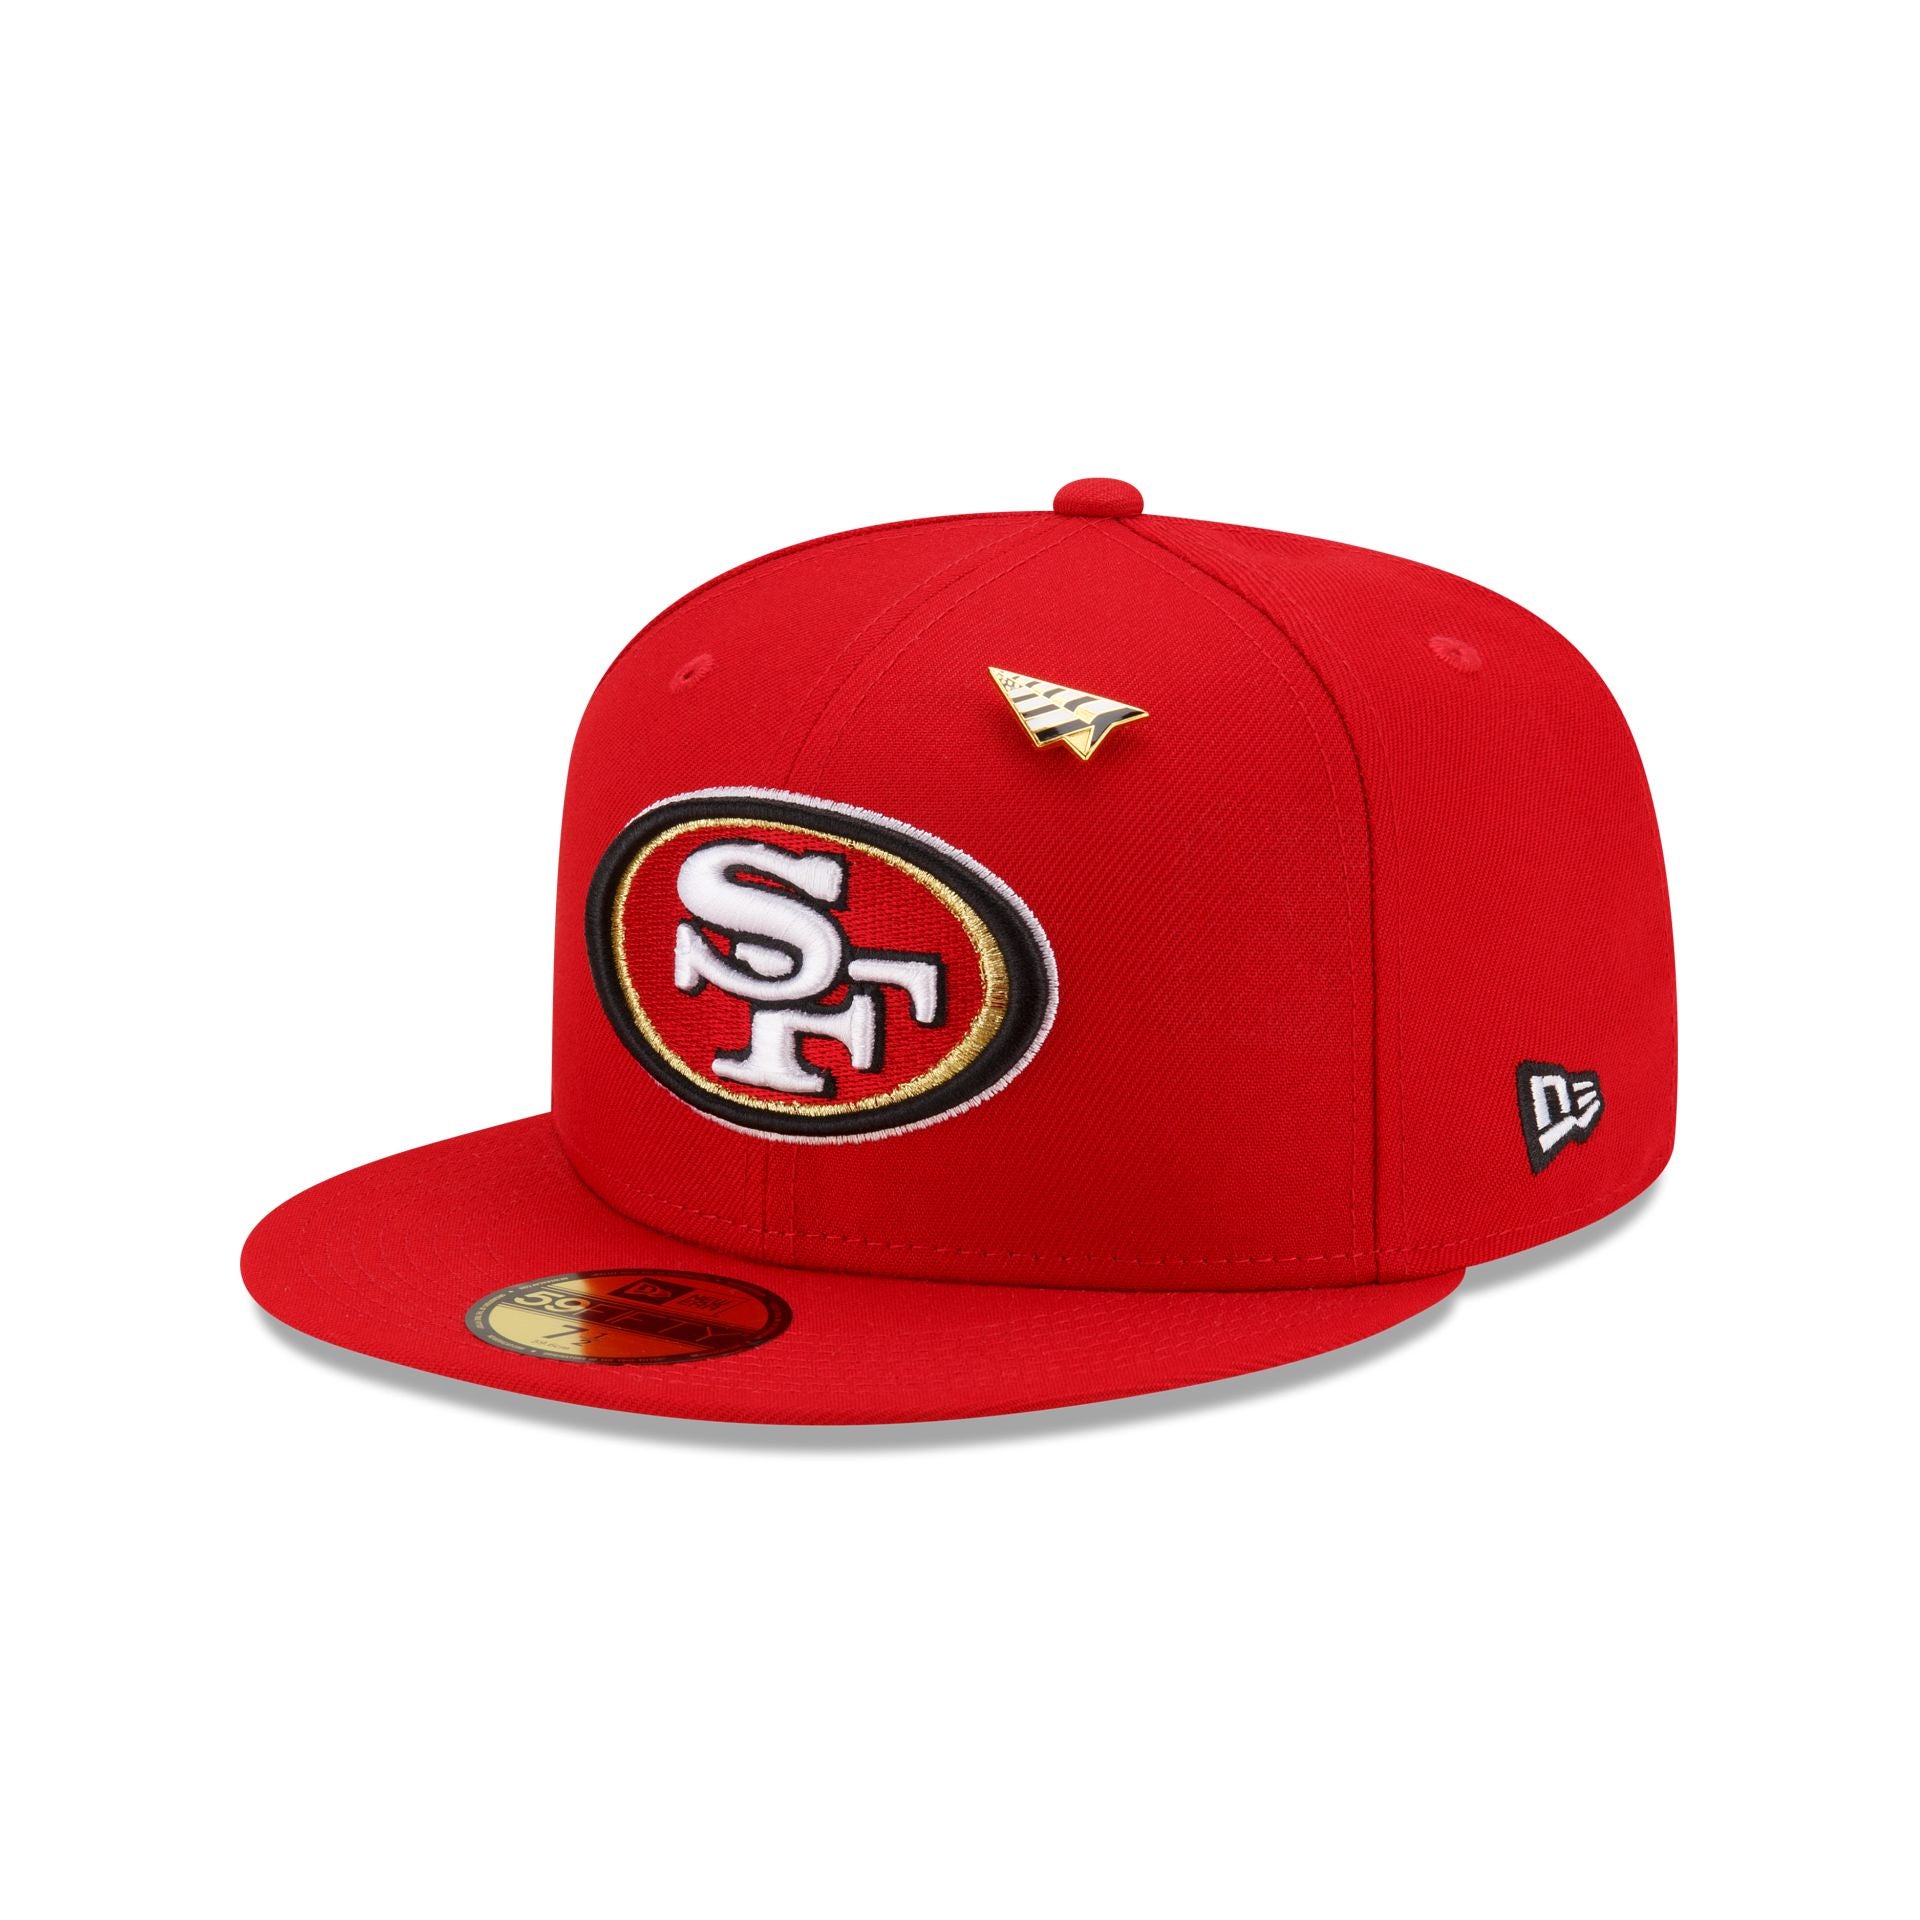 Paper Planes x Arizona Cardinals 59FIFTY Fitted Hat Black / 7